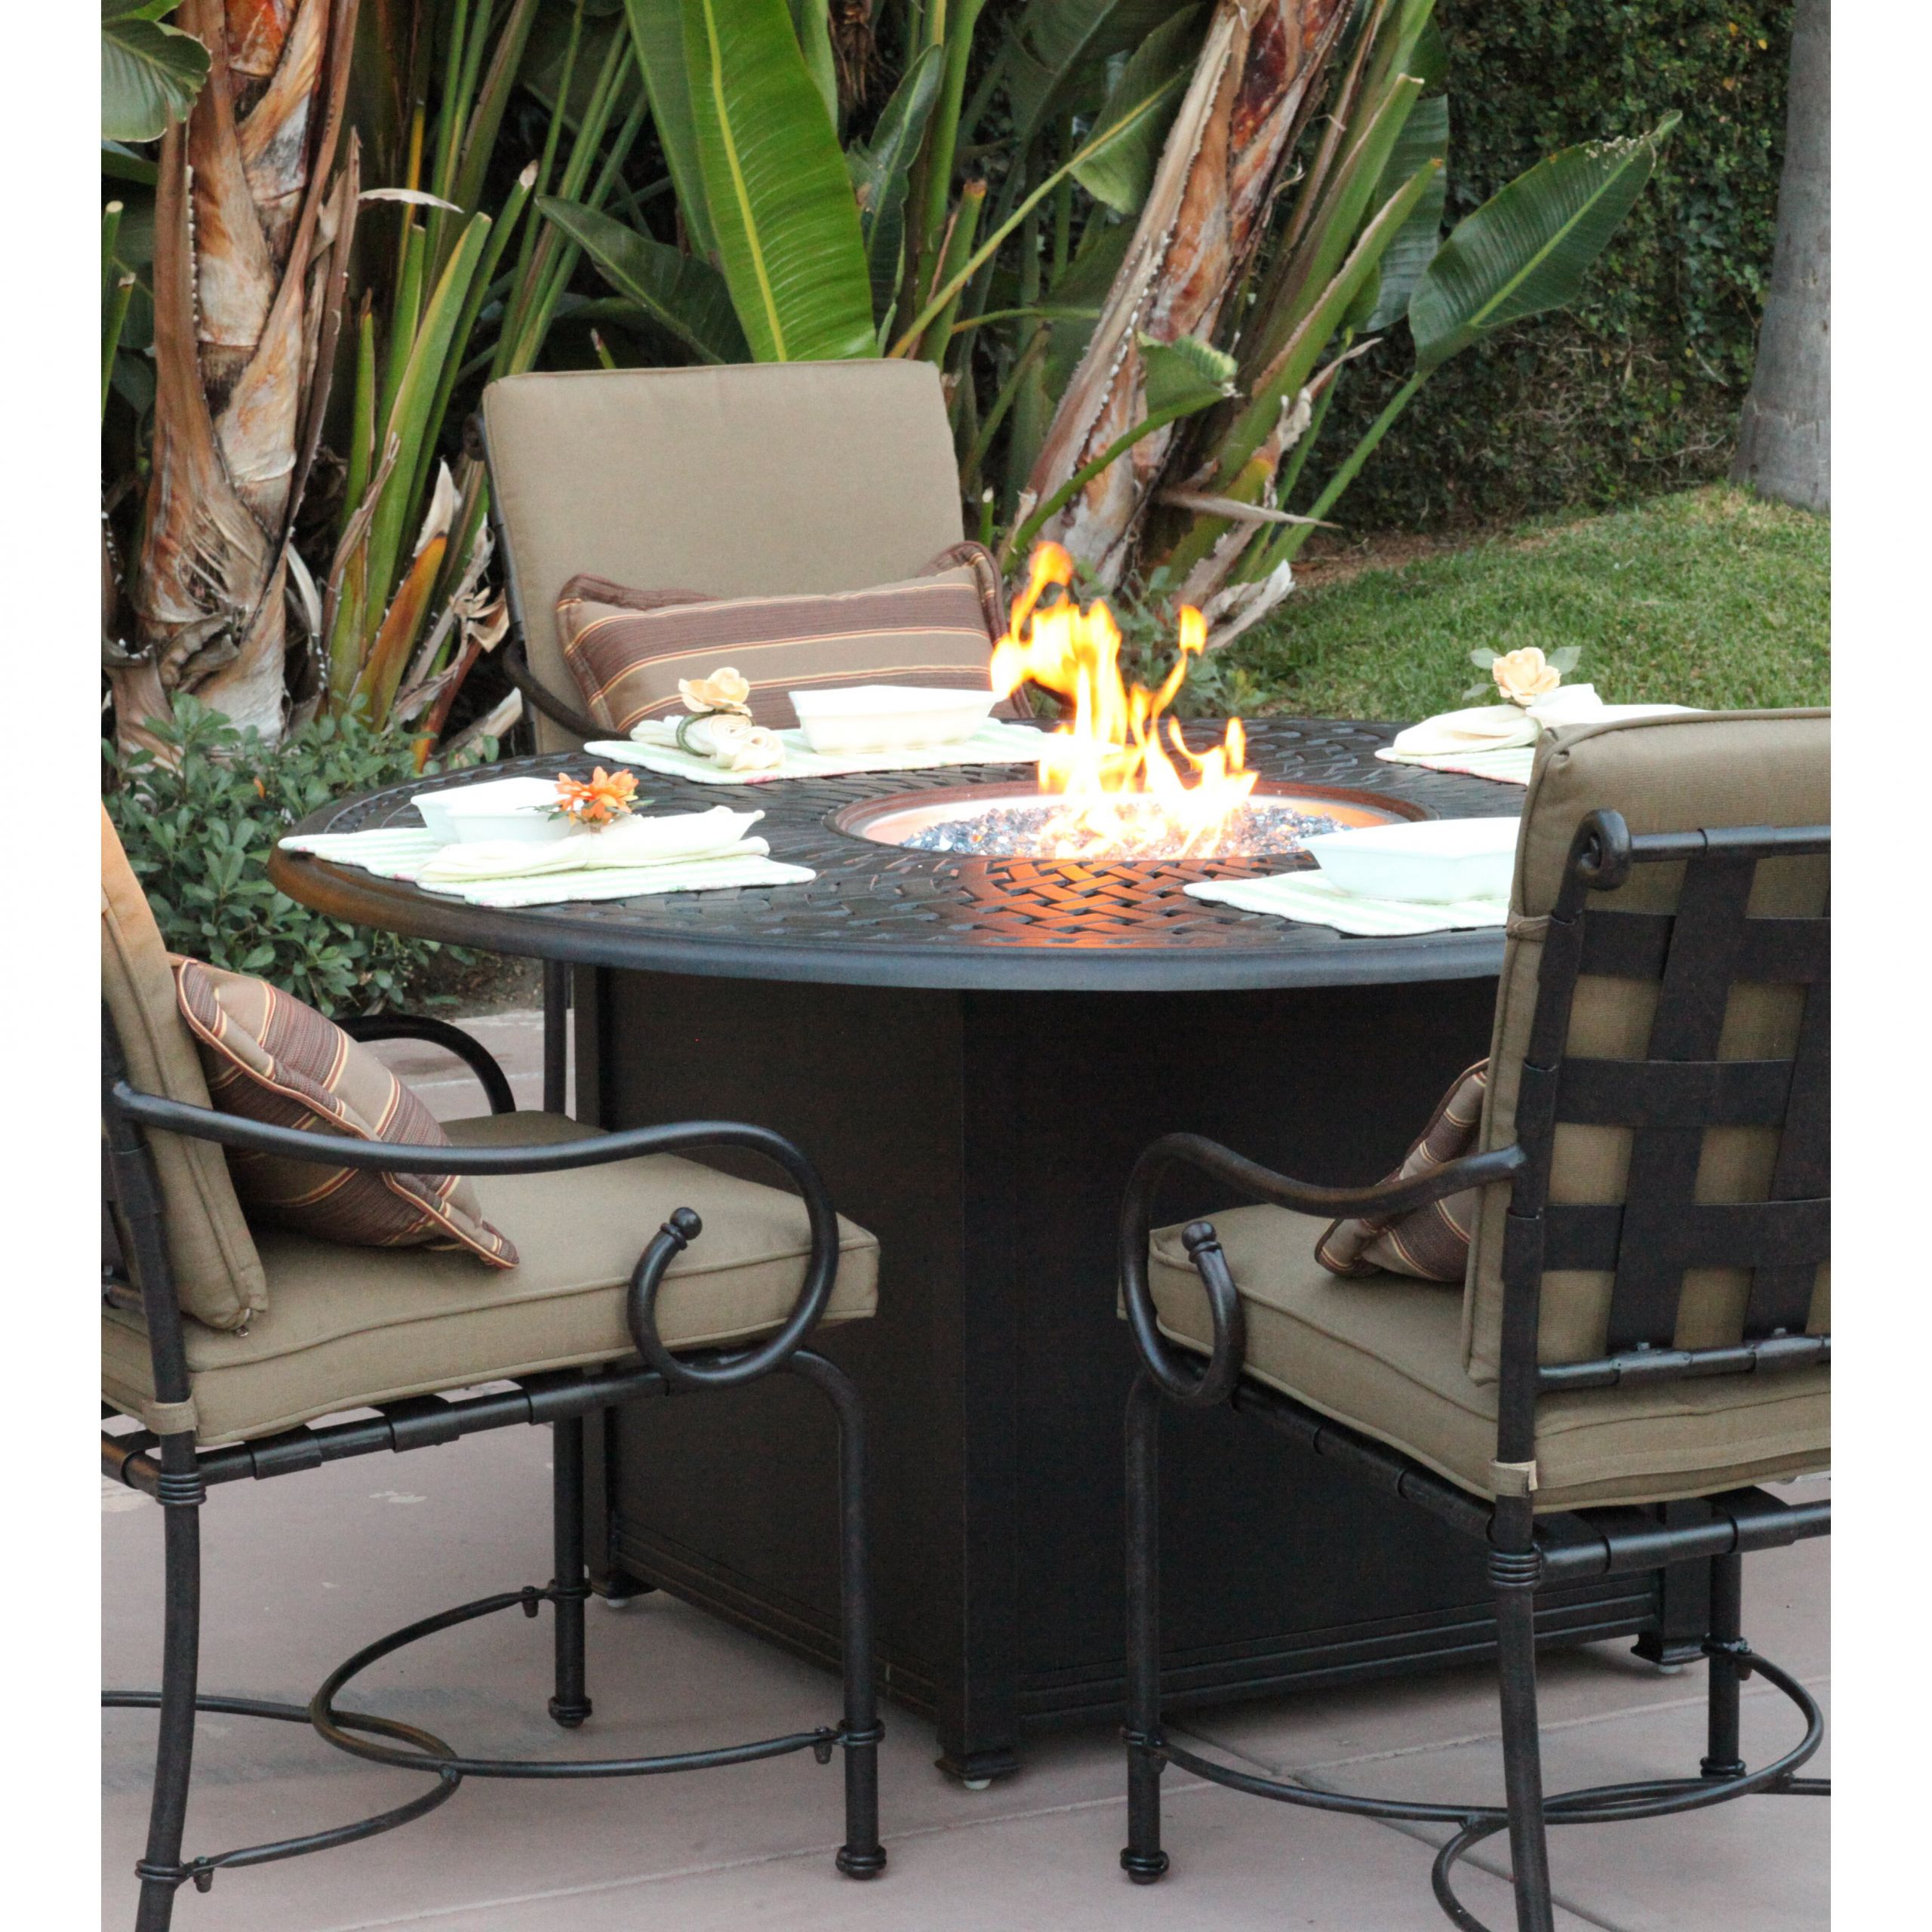 Patio Table With Firepit
 Darlee Series 60 Fire Pit Table & Reviews